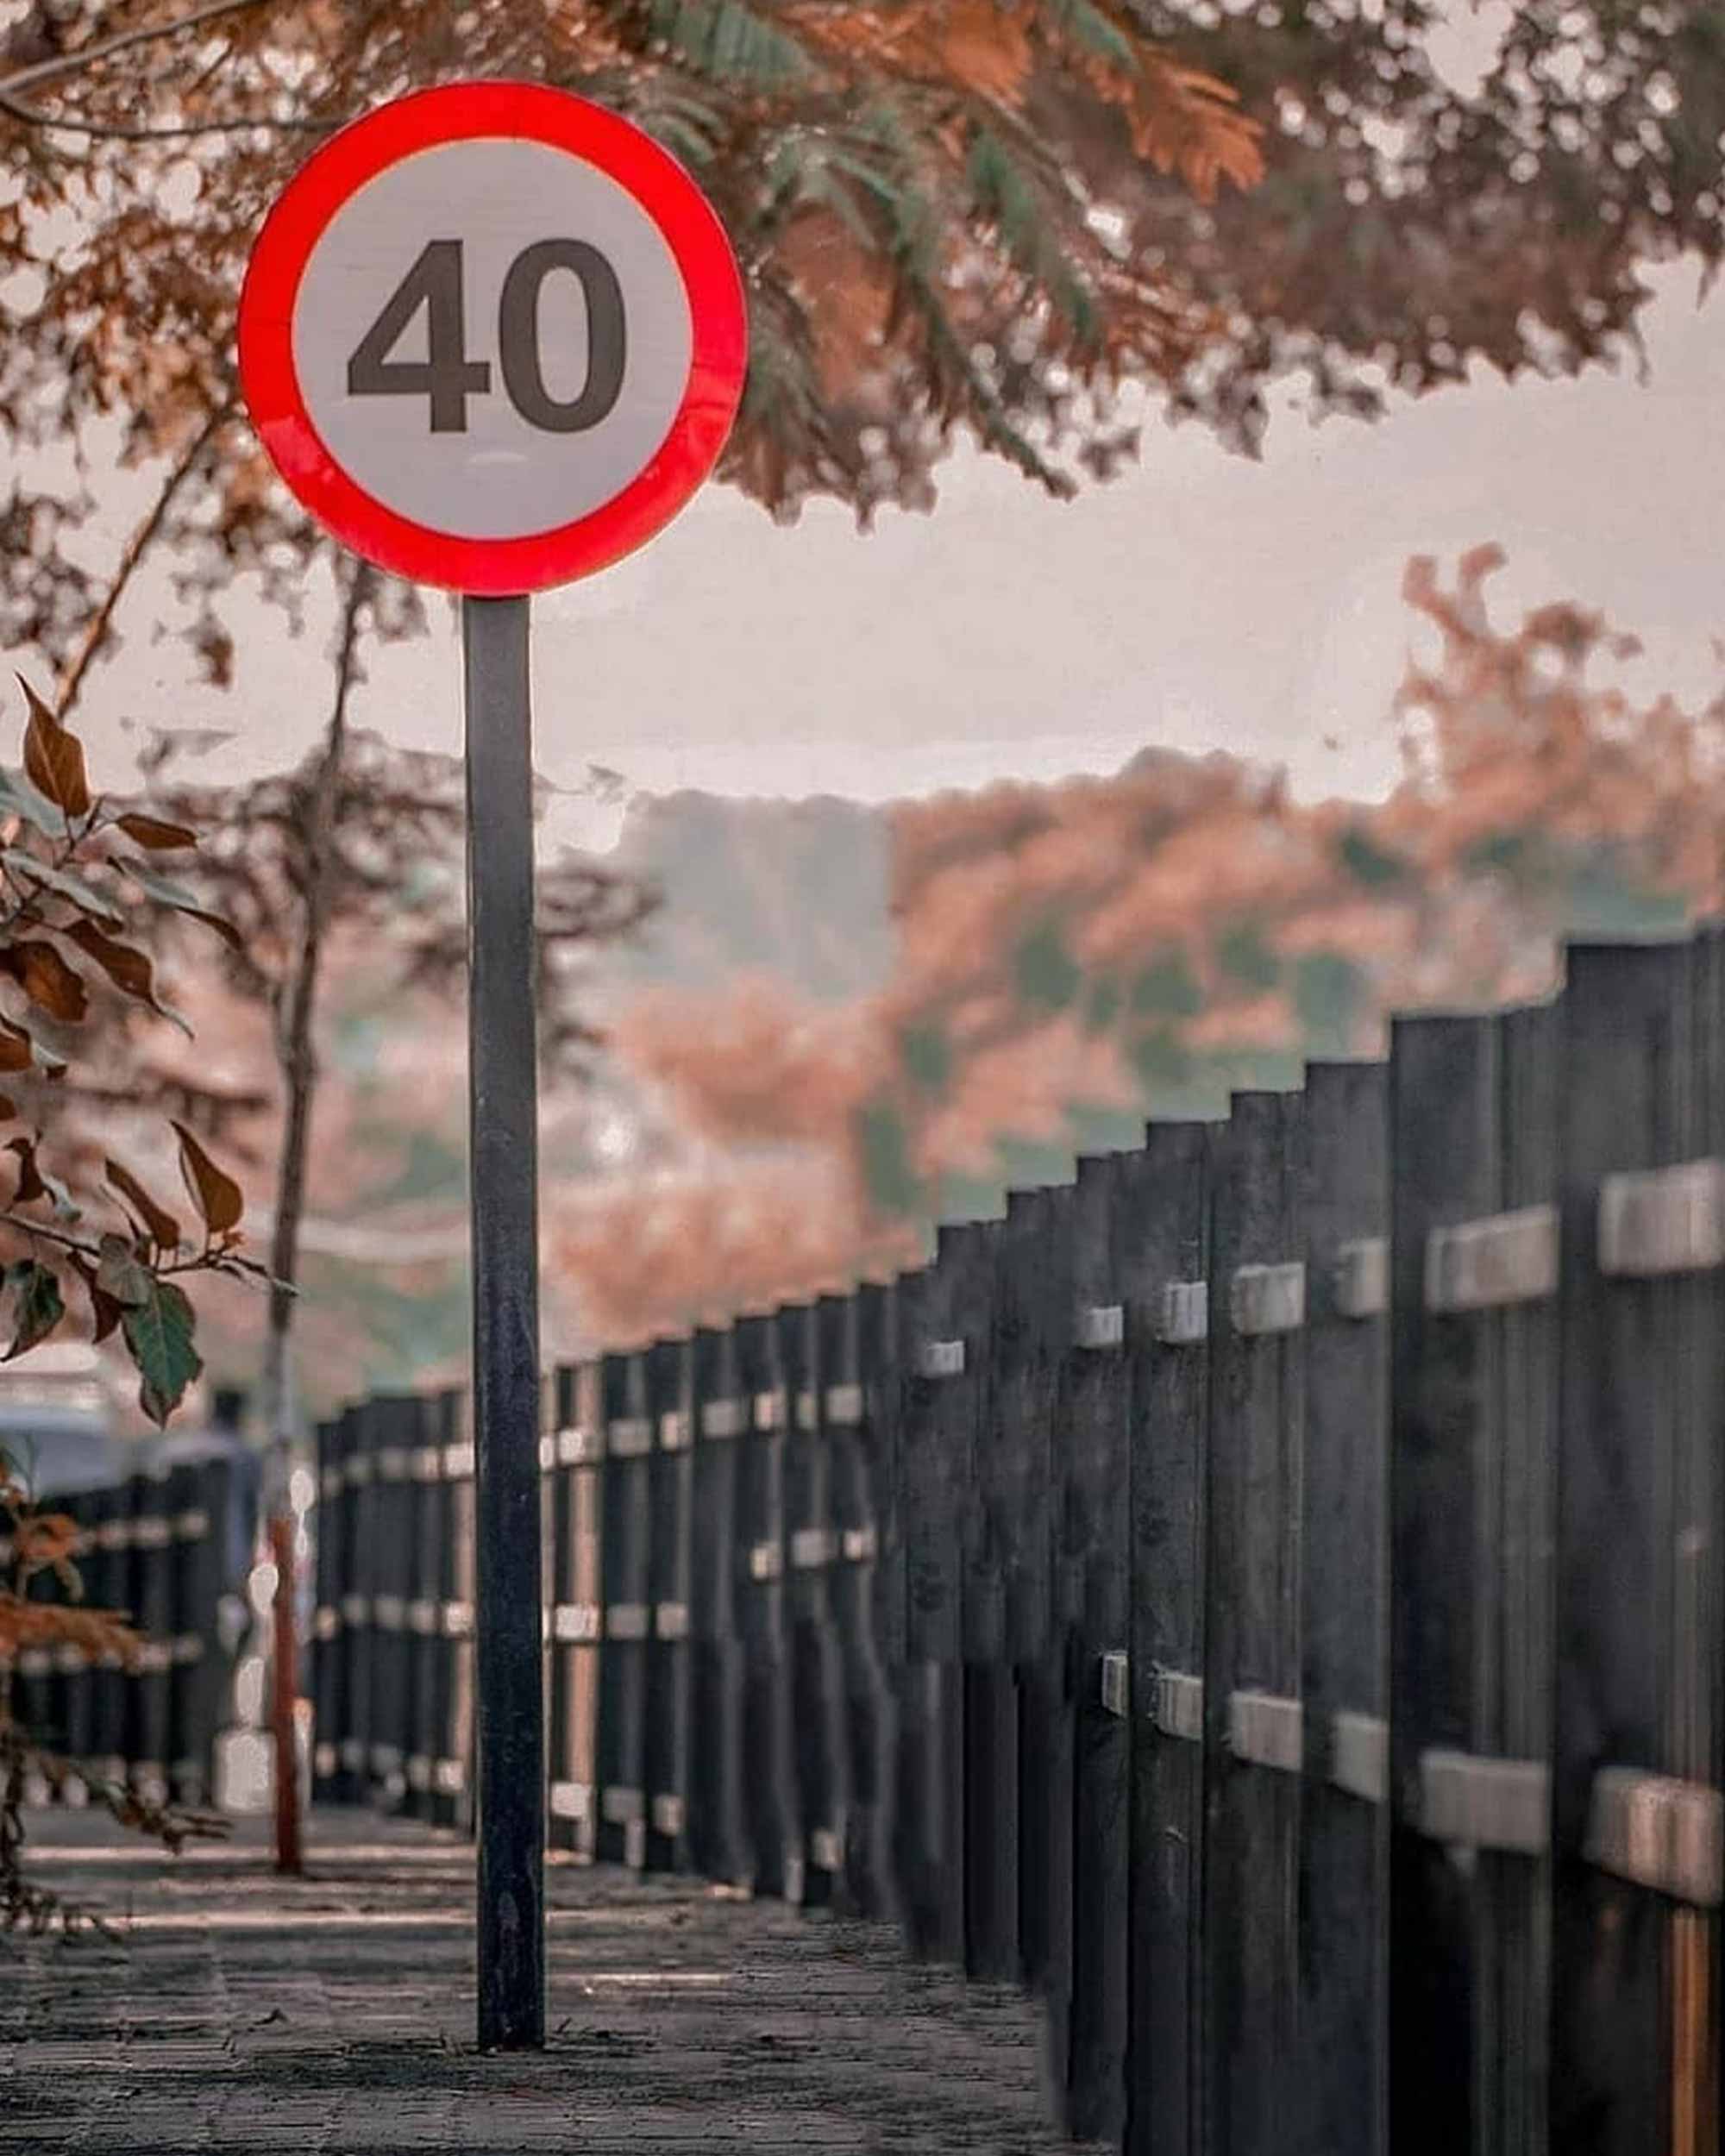 Speed Limit Board PicsArt Background Free Stock Image